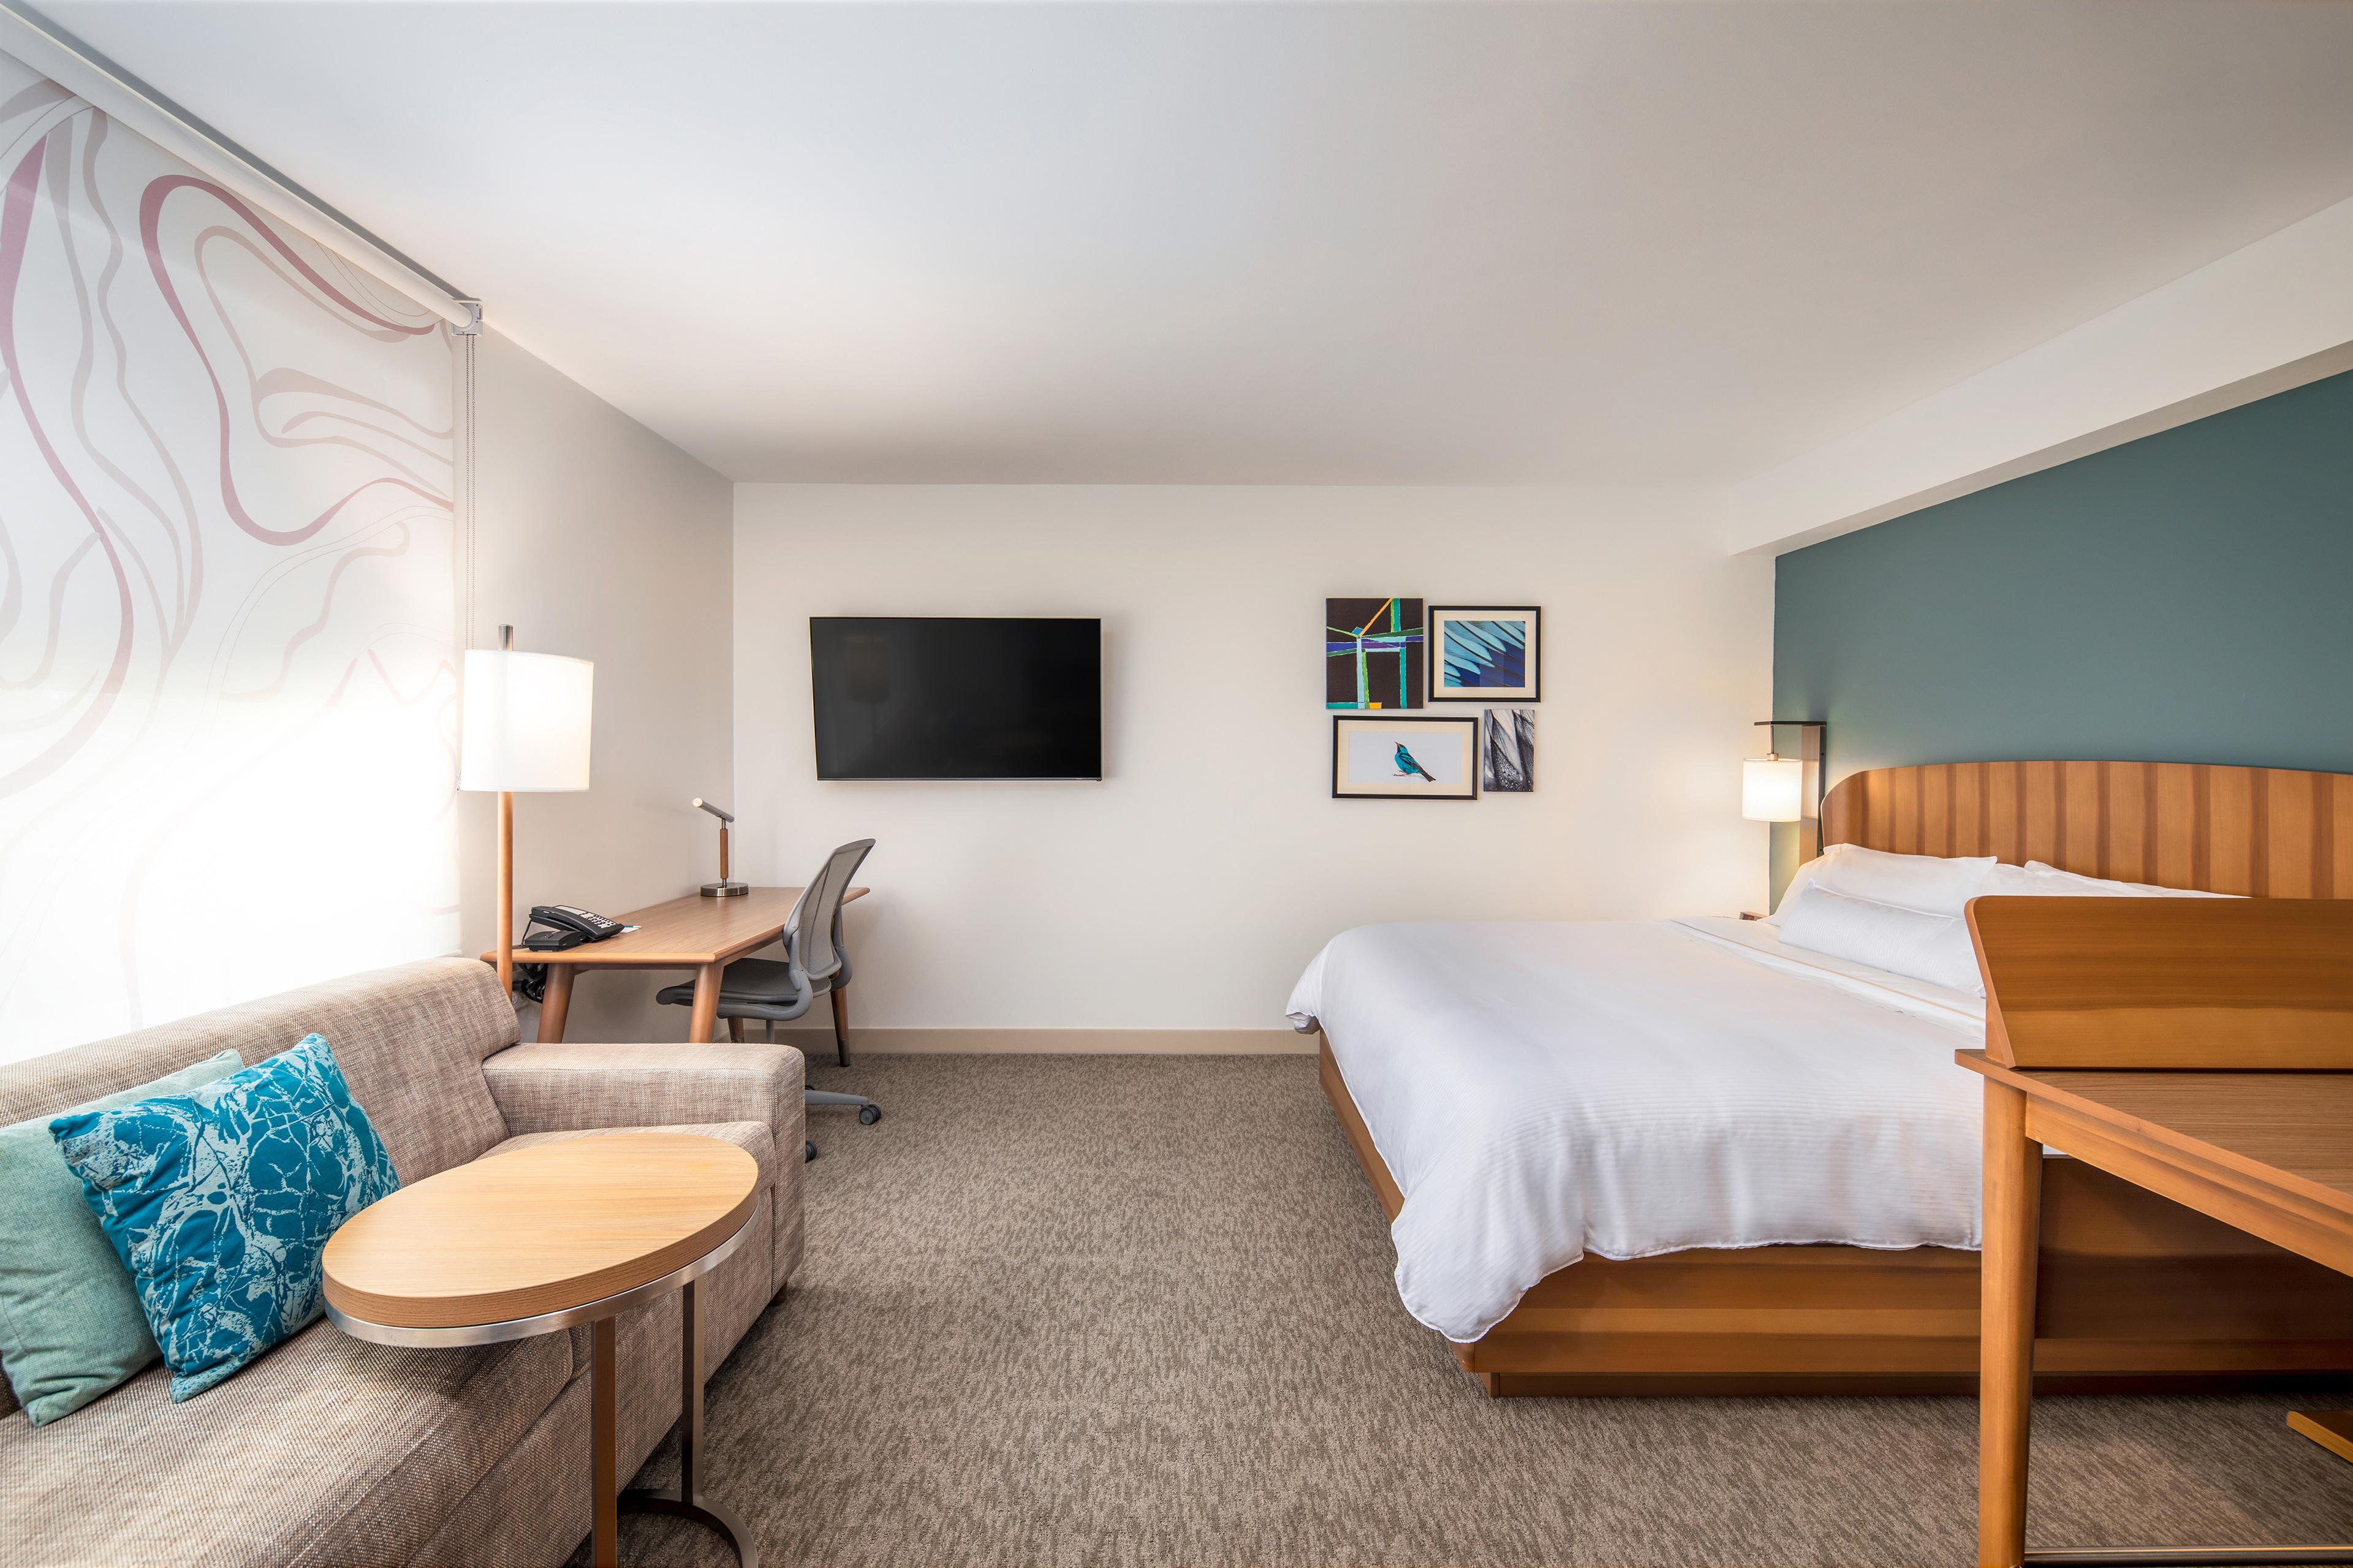 Unwind after a busy day in Bentonville in our spacious studio king rooms. Enjoy a snack and beverage while watching a movie on the large, flat-panel TV.